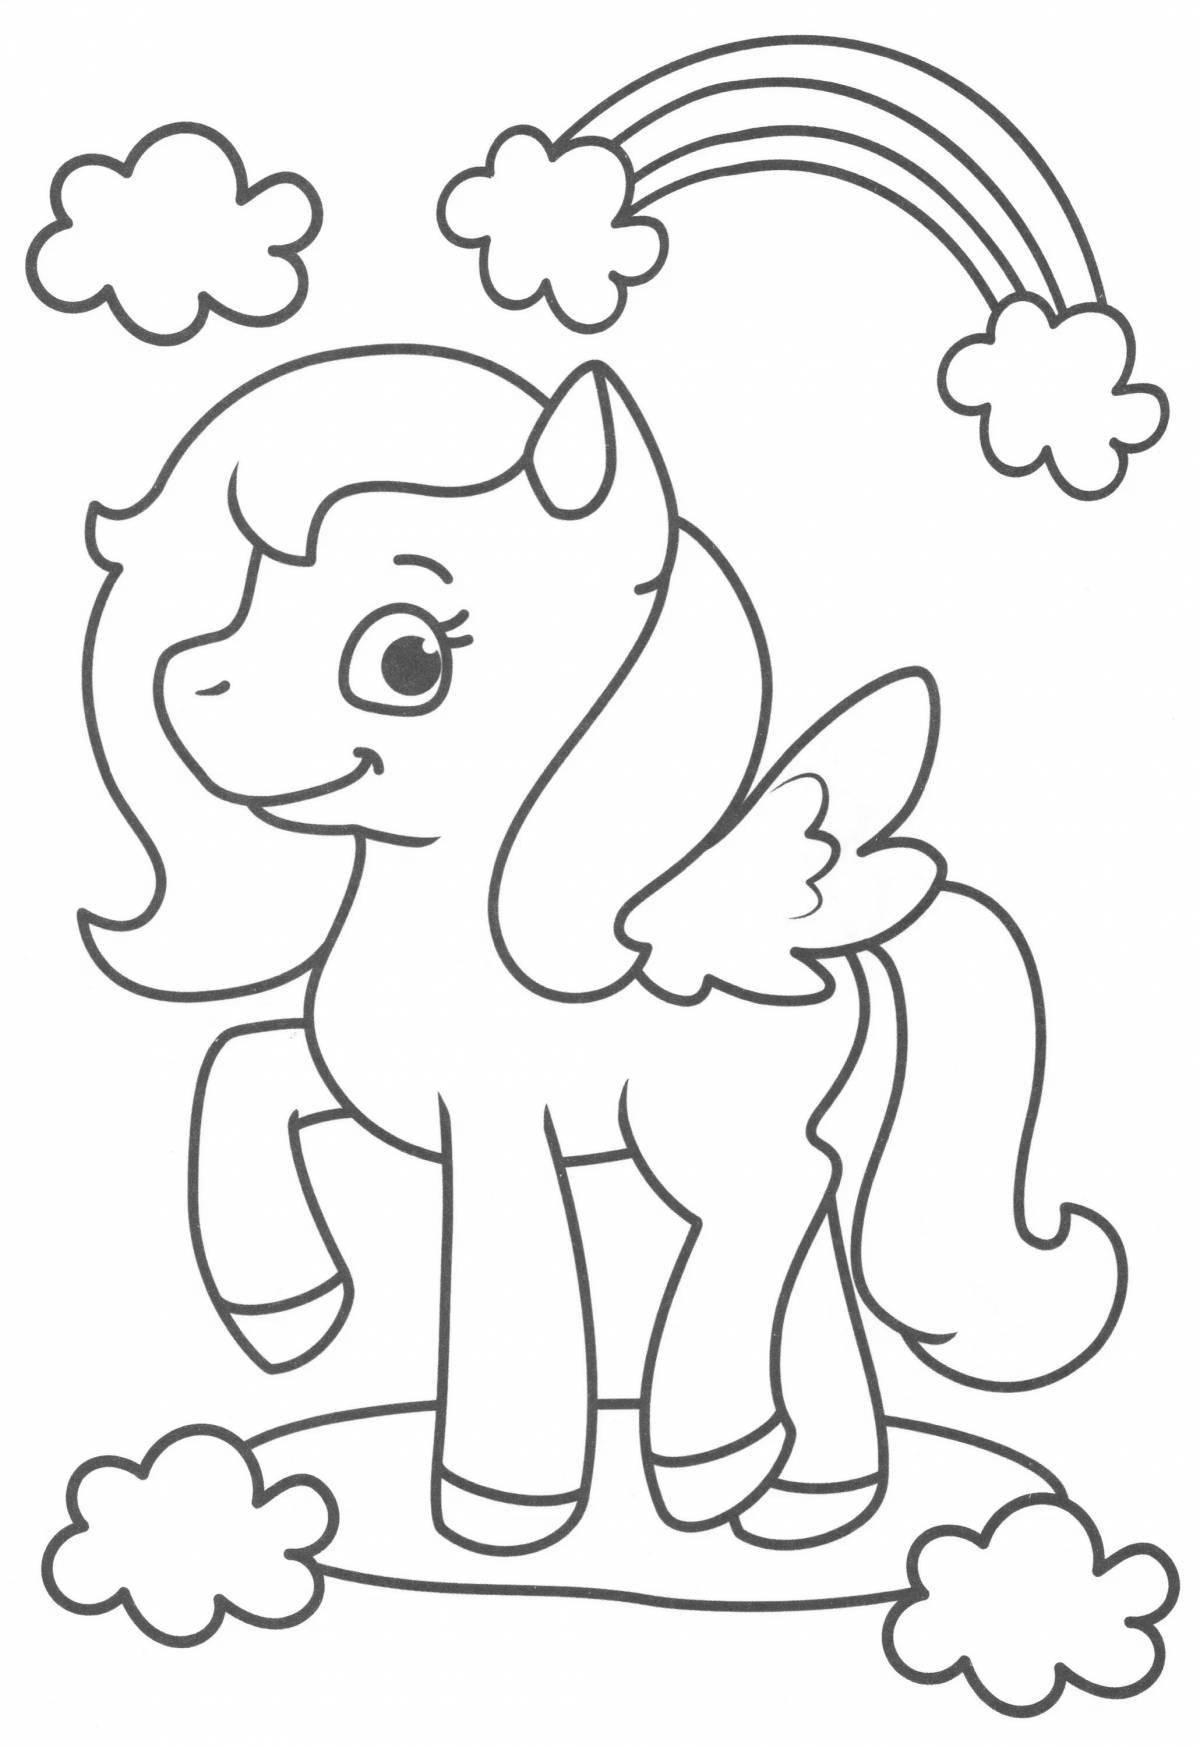 Violent pony coloring for girls 4-5 years old